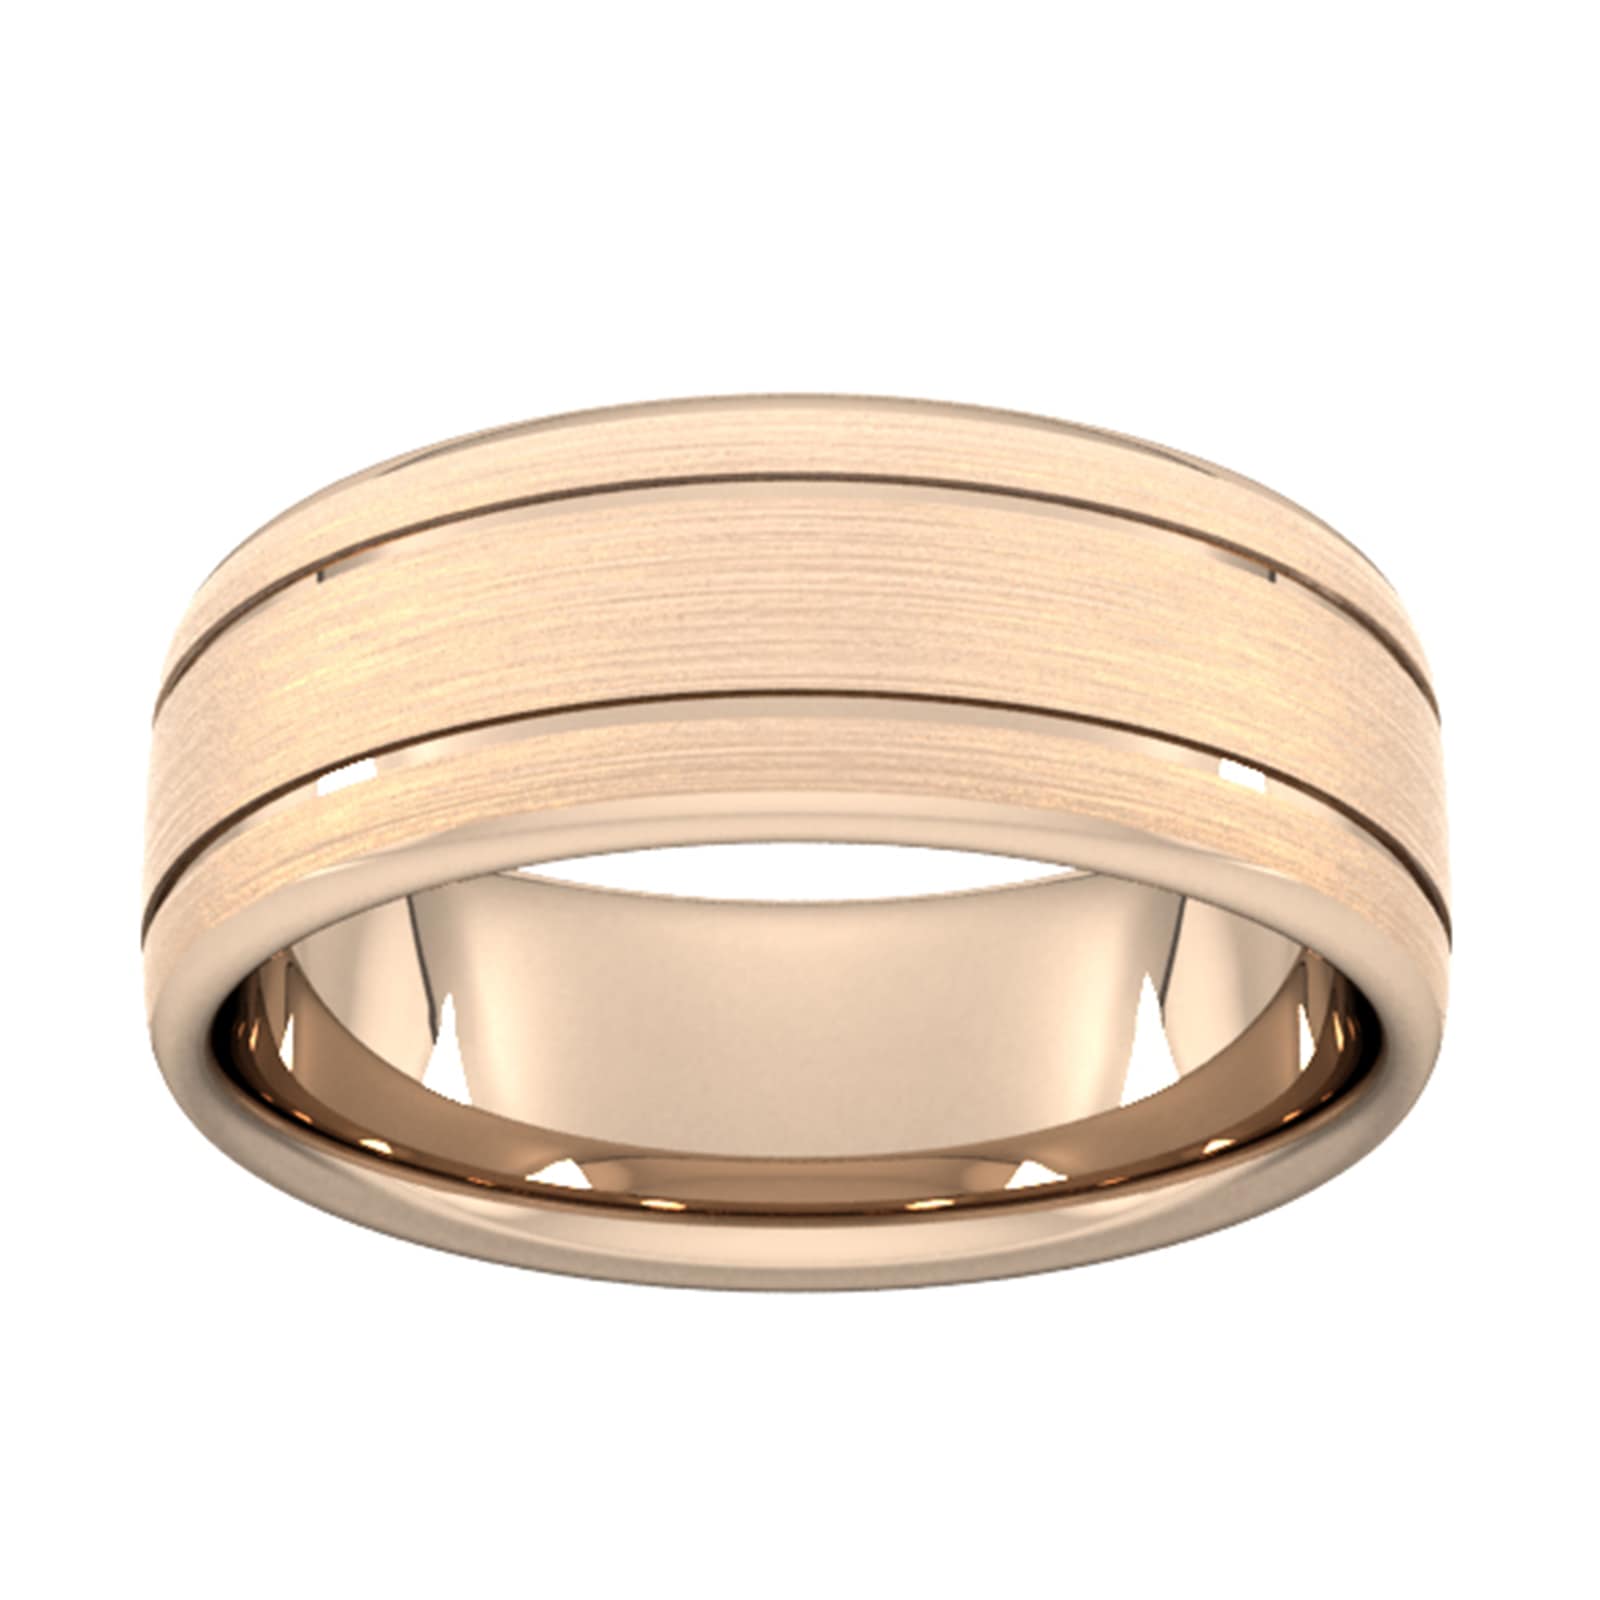 8mm D Shape Heavy Matt Finish With Double Grooves Wedding Ring In 18 Carat Rose Gold - Ring Size P